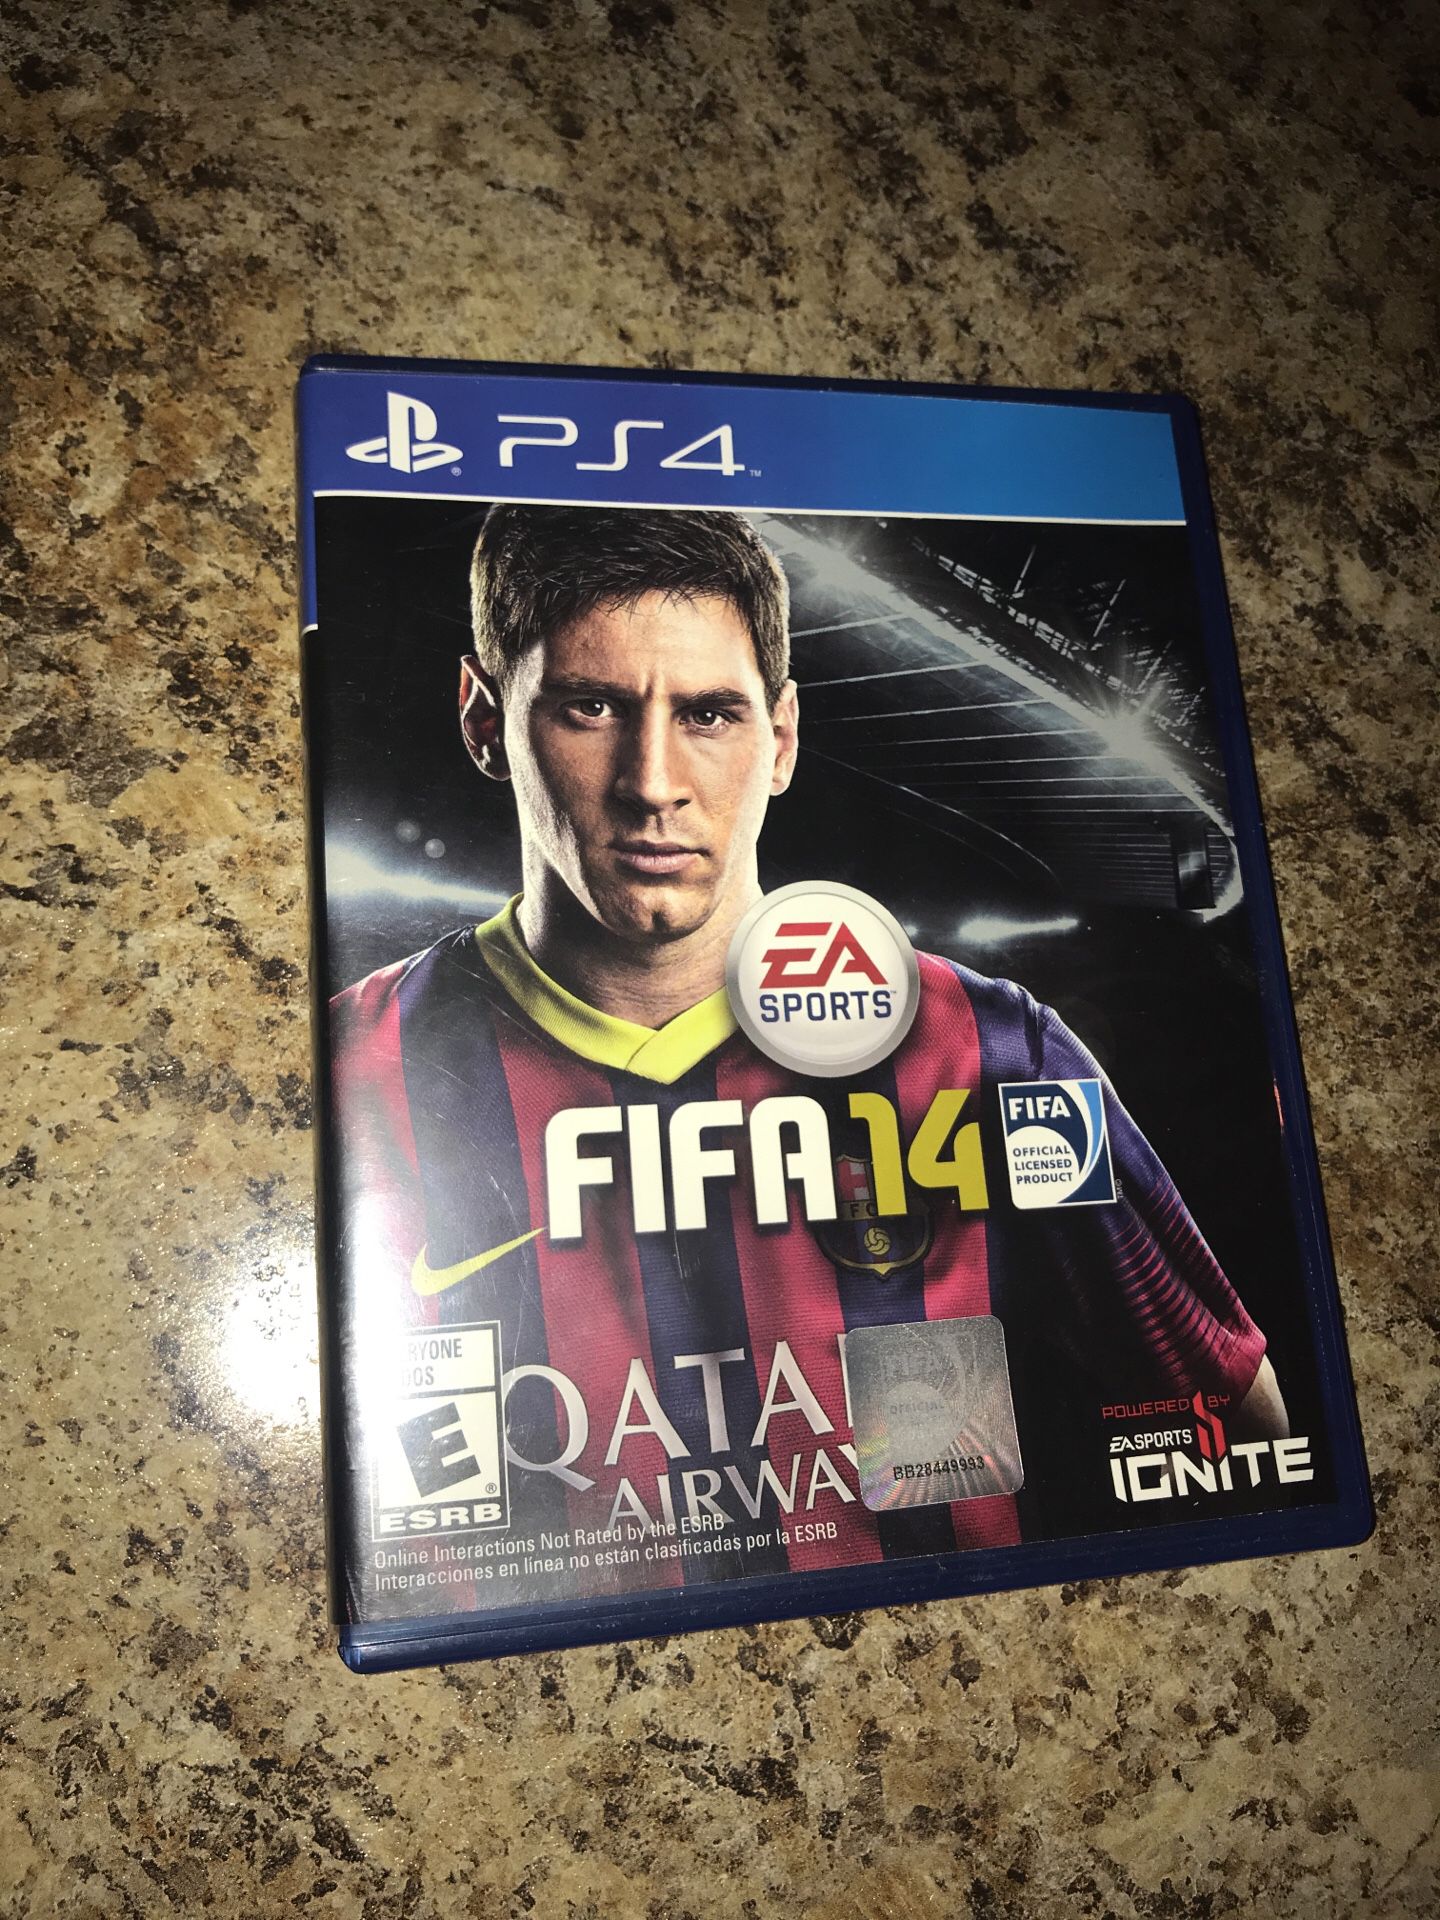 Fifa 14 For Ps4 Brand New Ea Sports Soccer Fabulous Game For Anyone Great For The Whole Family For Sale In Lutz Fl Offerup